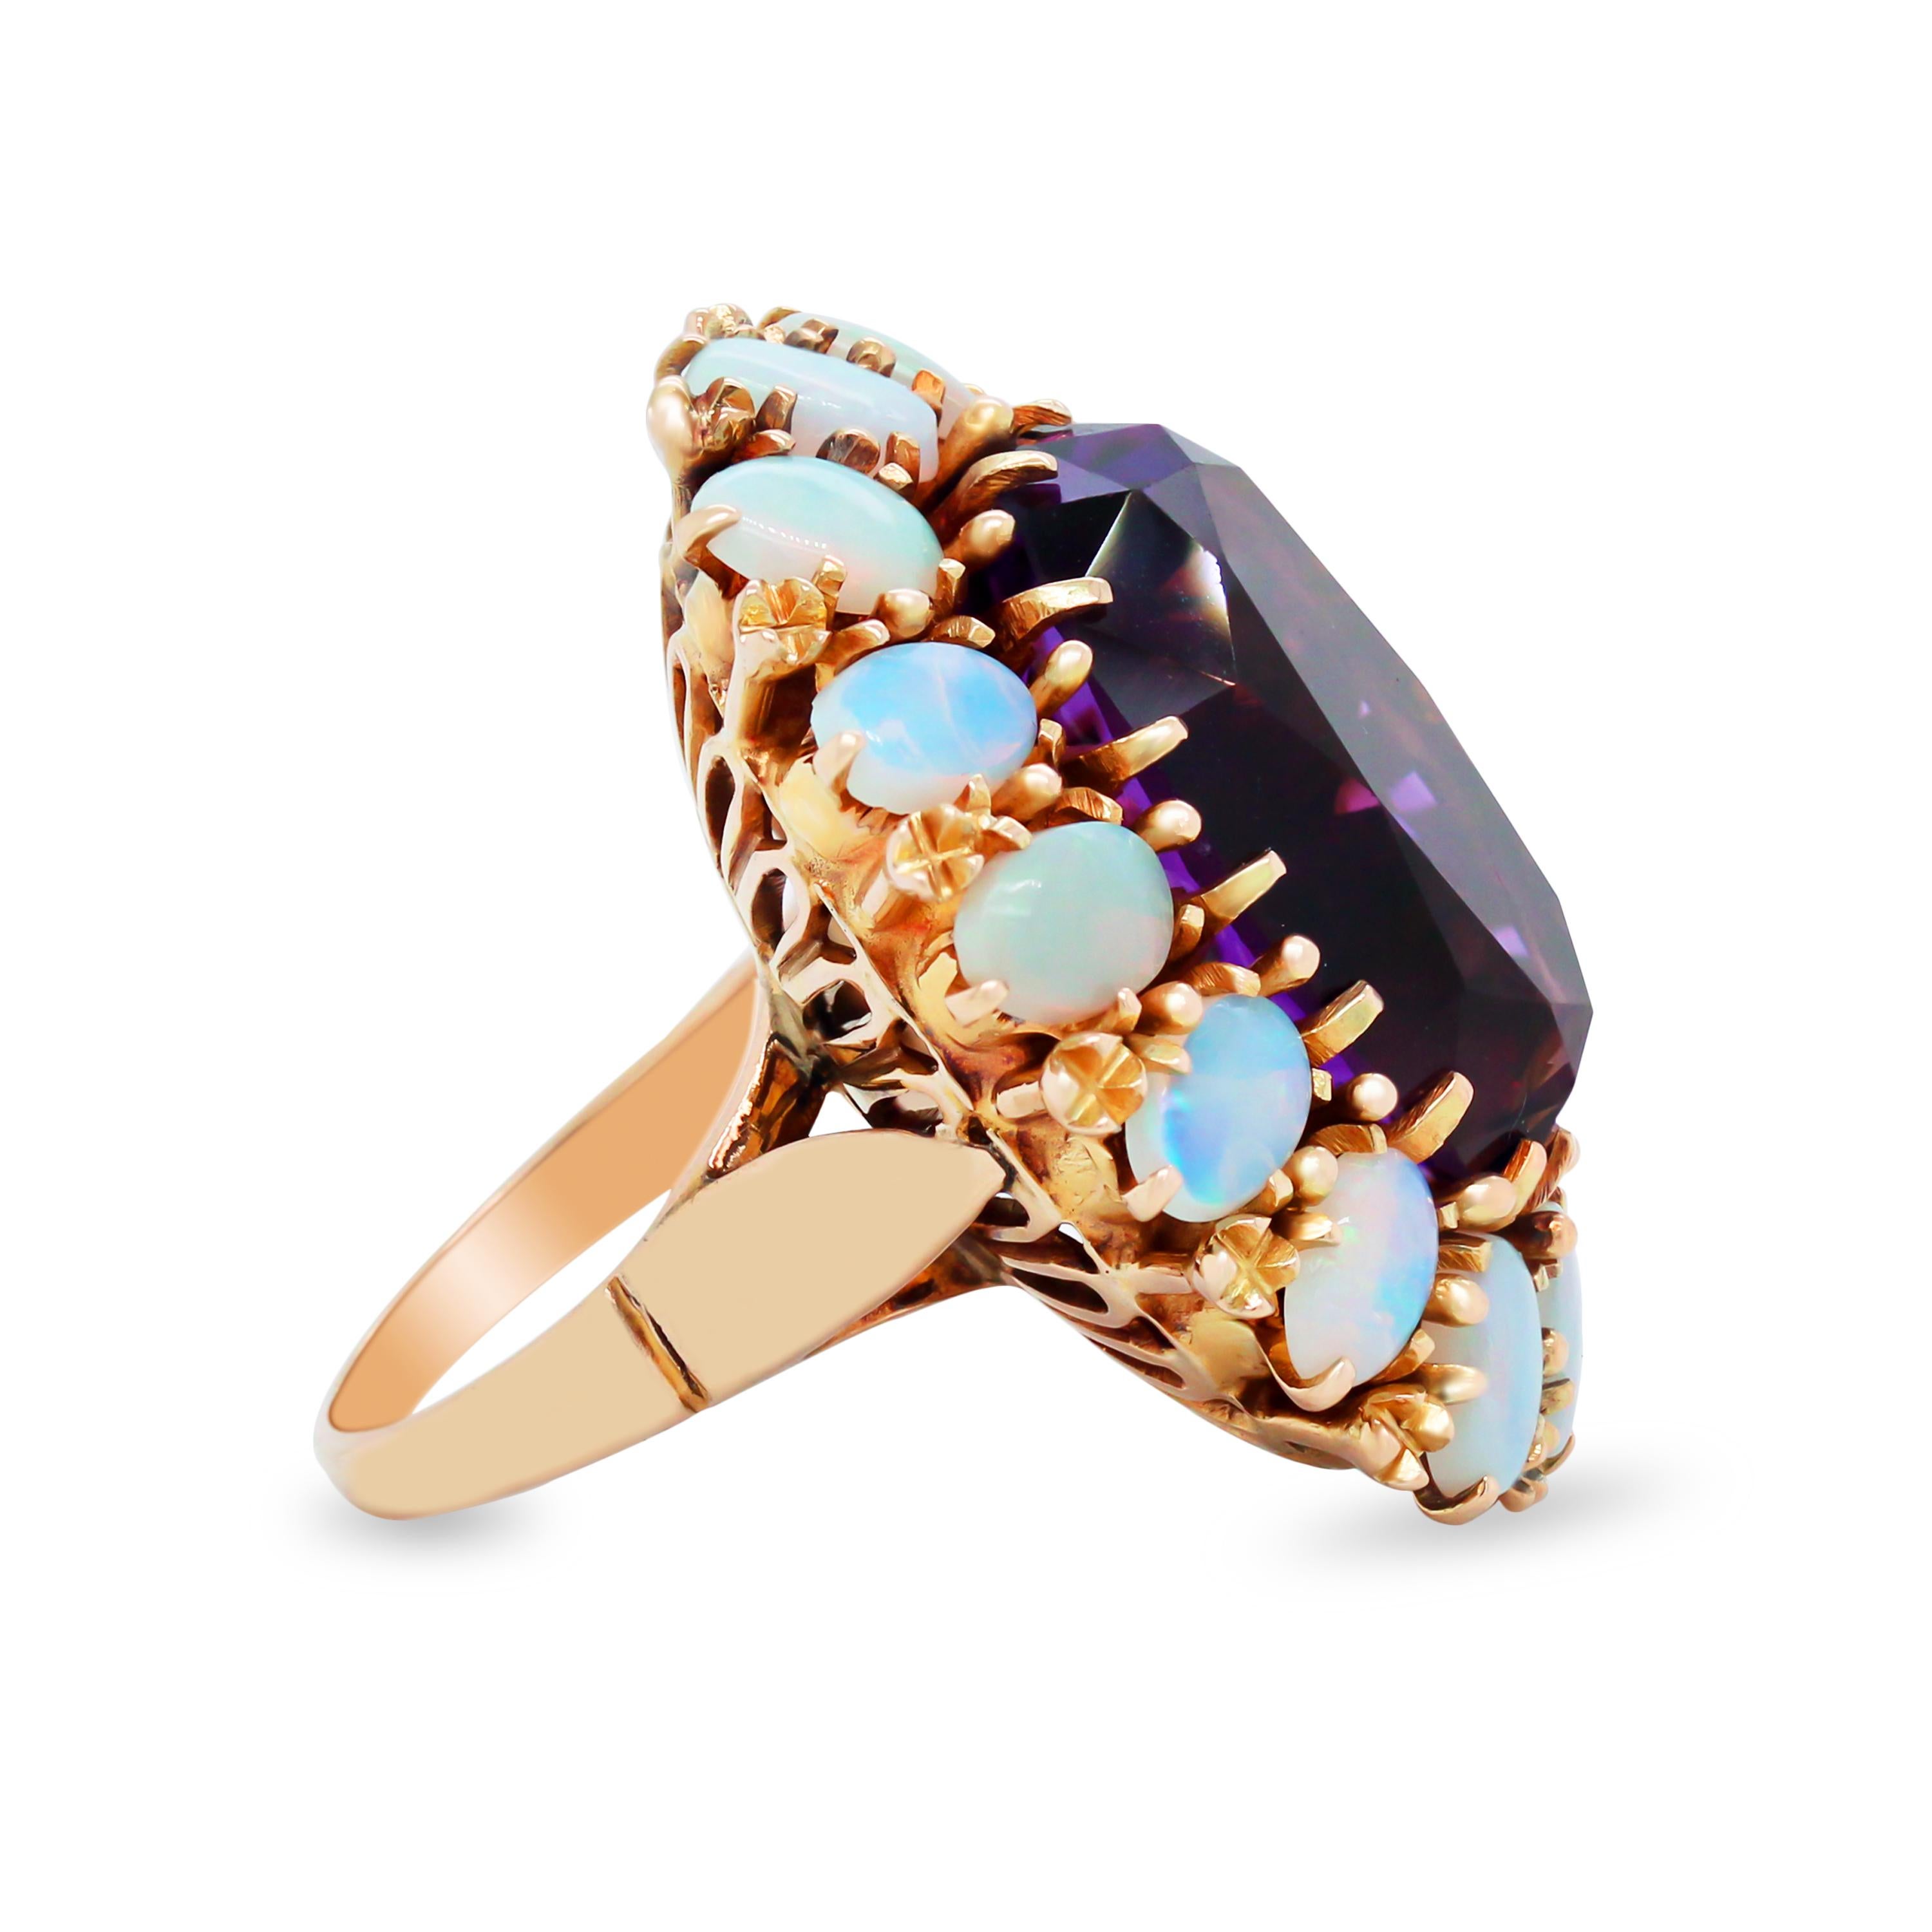 Victorian Yellow Gold Antique Cocktail Ring with Opals and Amethyst Center